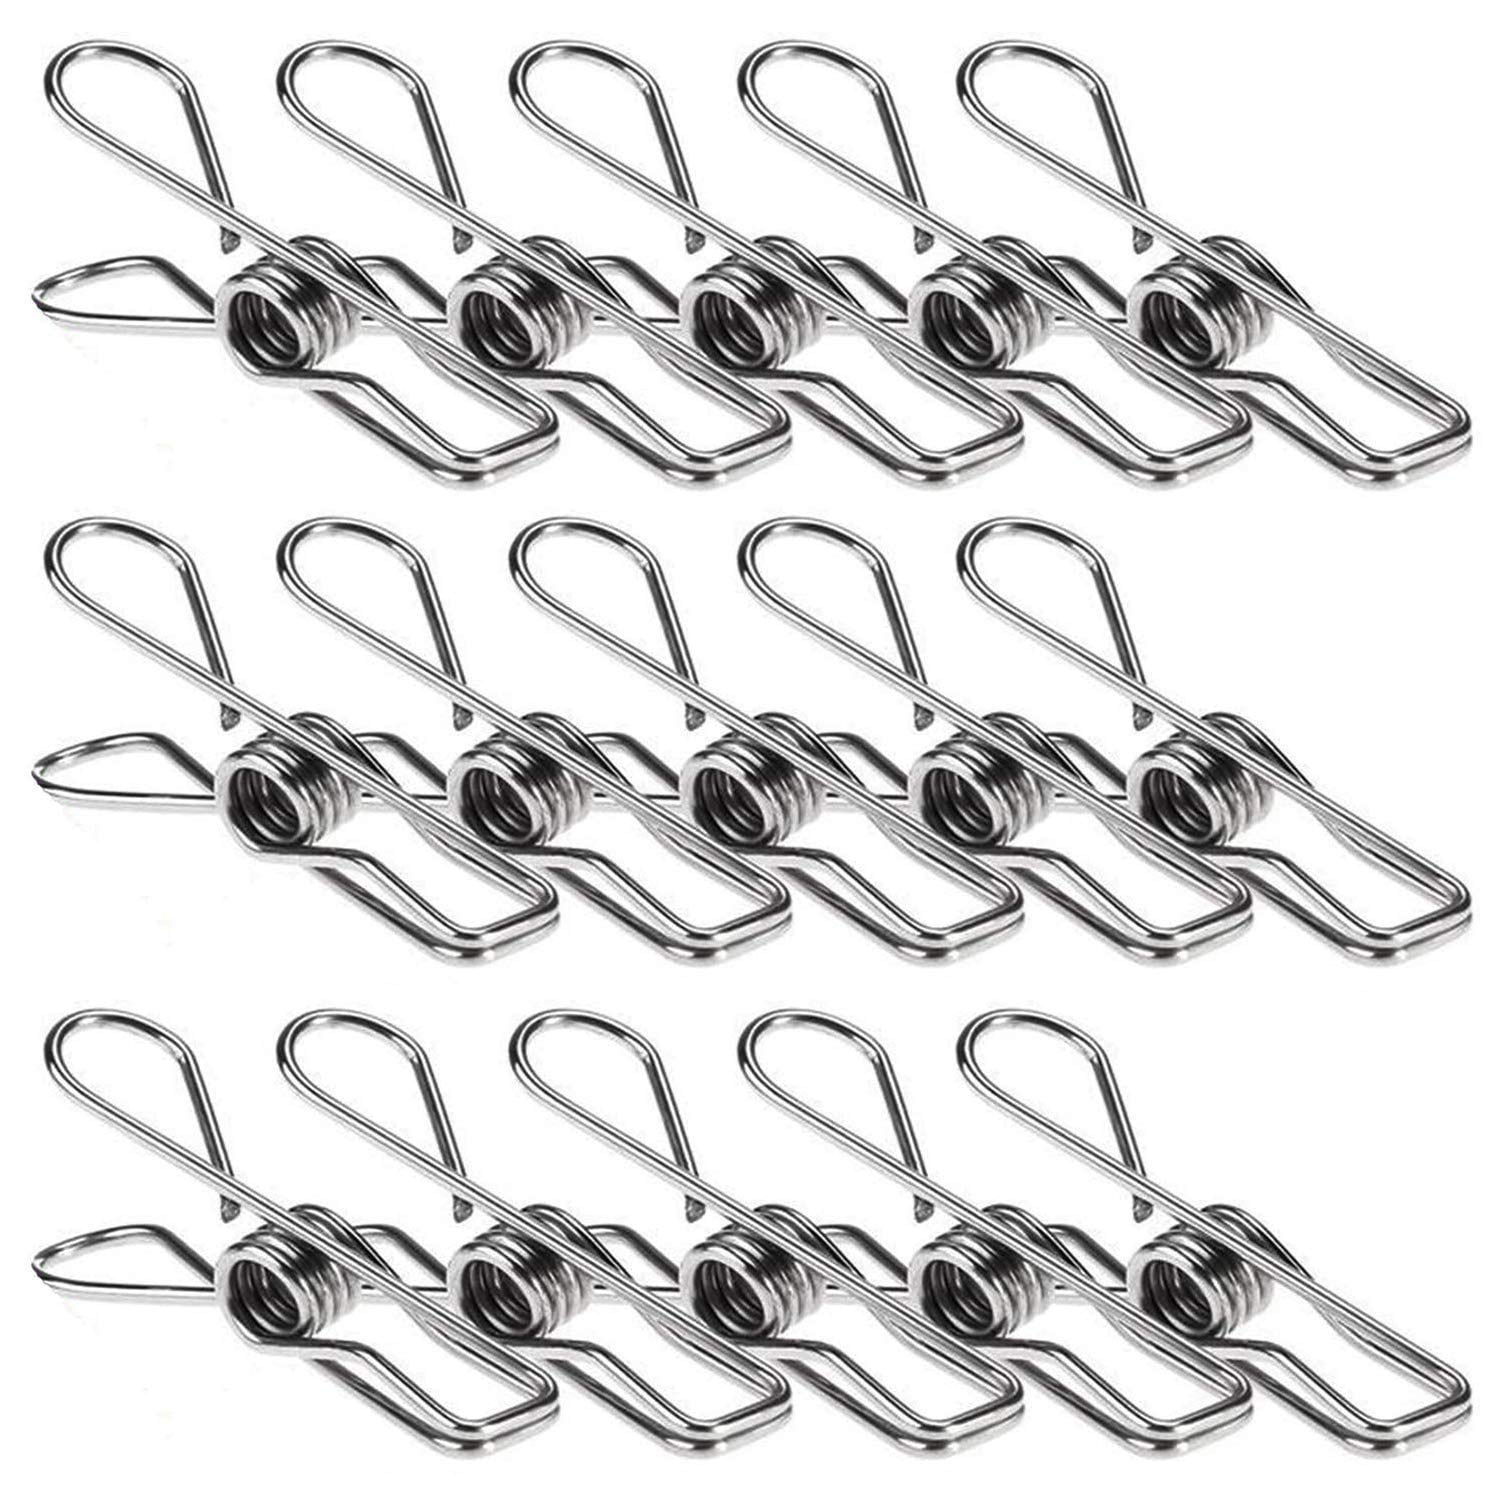 Clothes Drying Rack Metal Clothespins Hanger Hook Clip Laundry Hanging Air Dry 